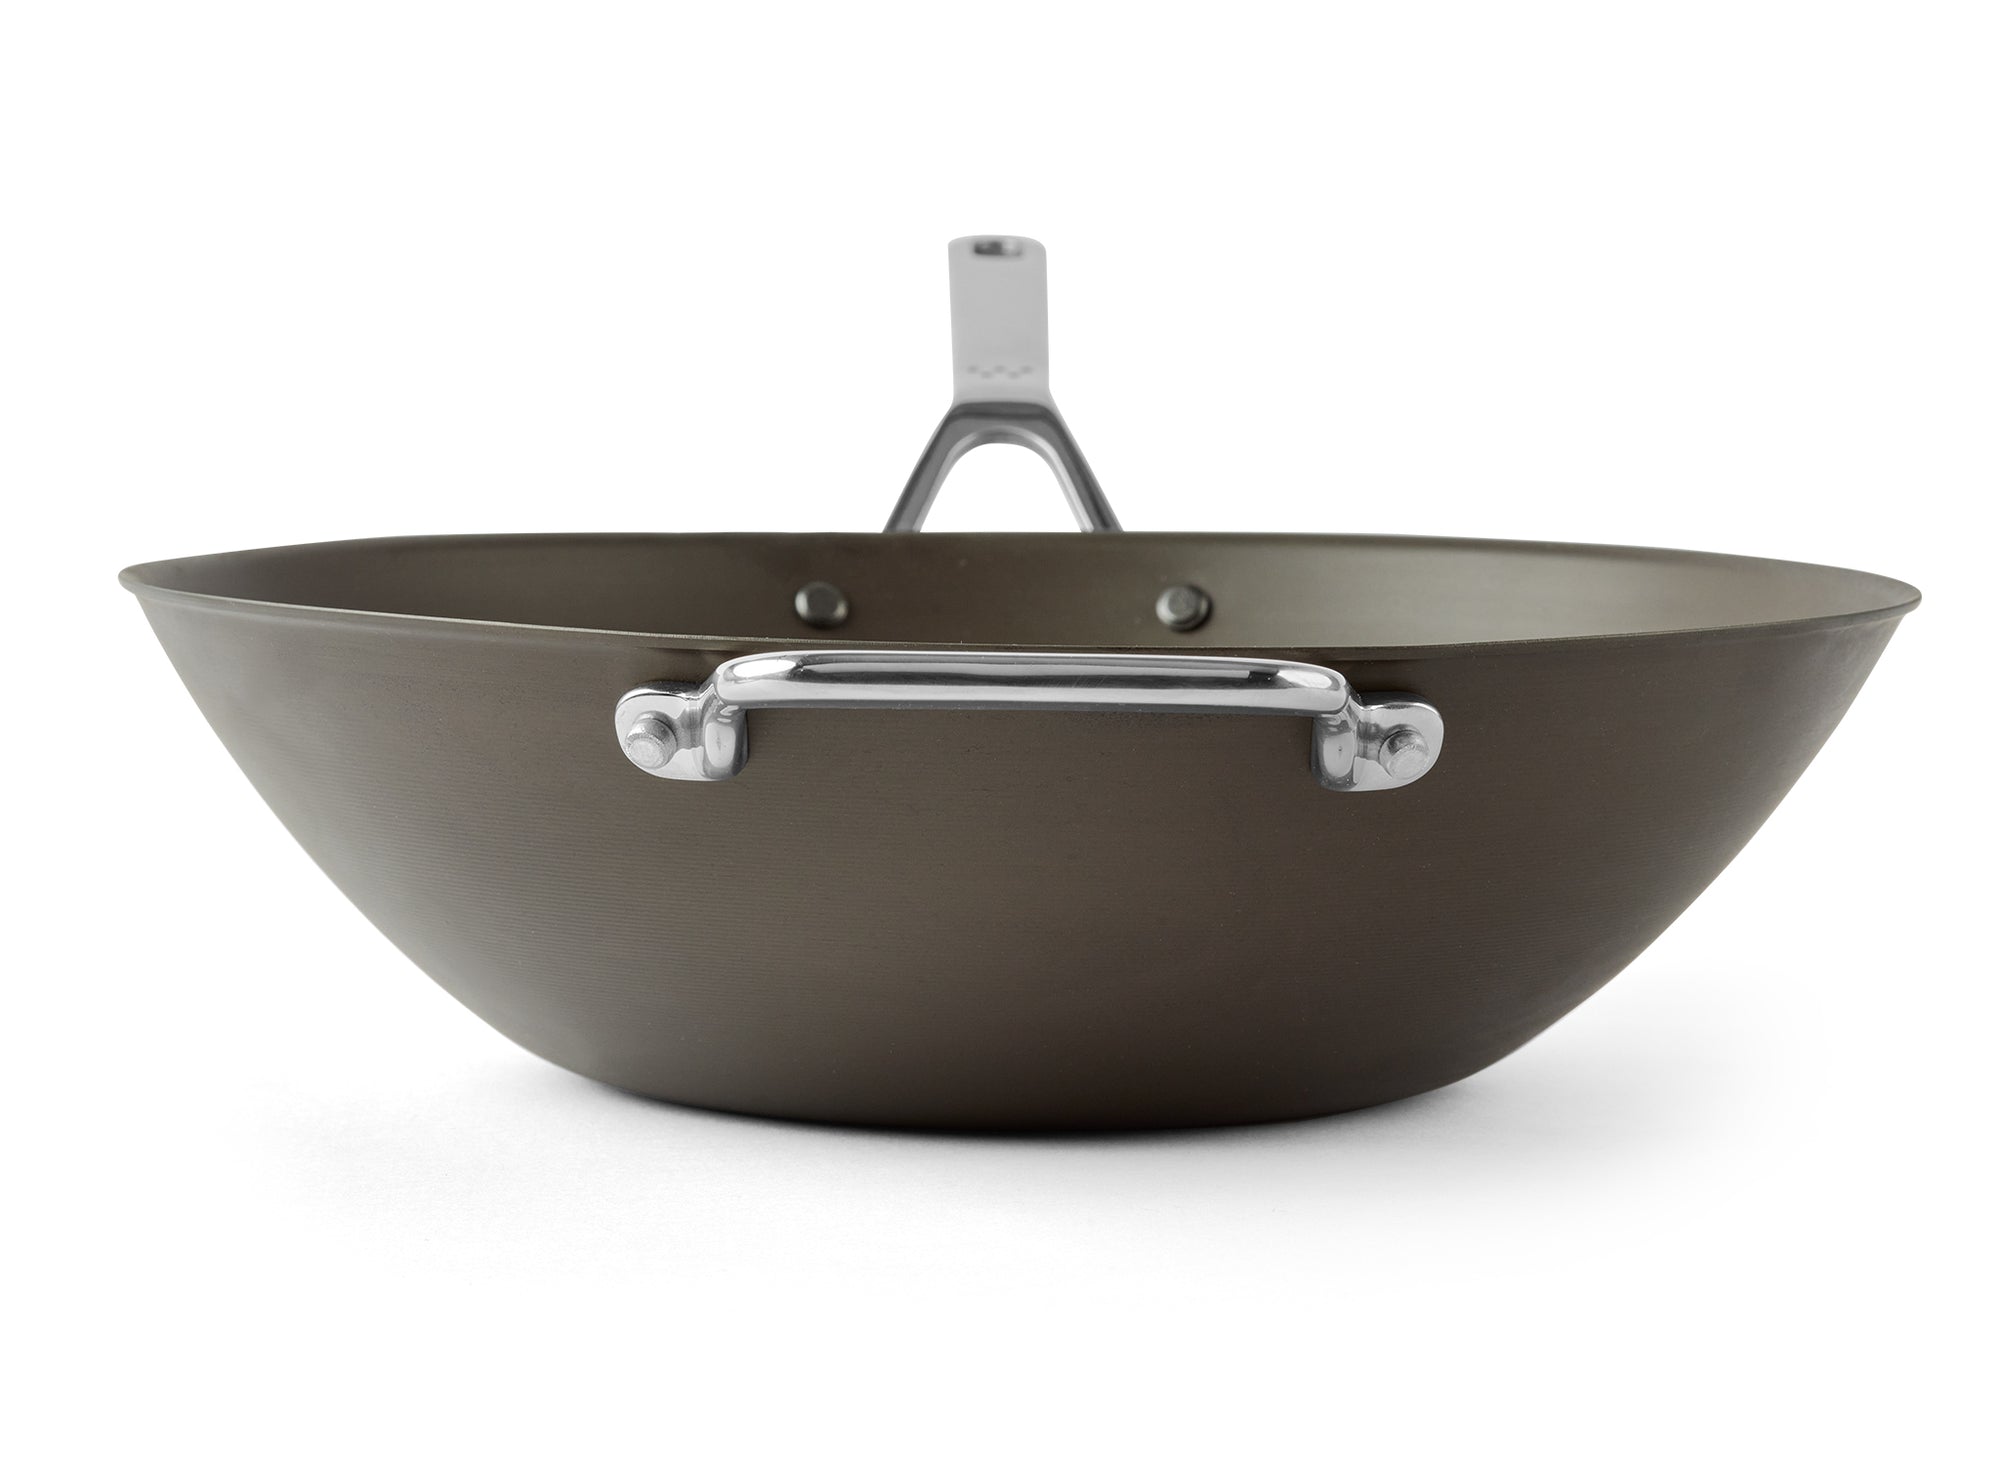 {{12-inch}} A frontend view of the Misen Carbon Steel Wok, with the shorter handle clearly visible, on a white background.